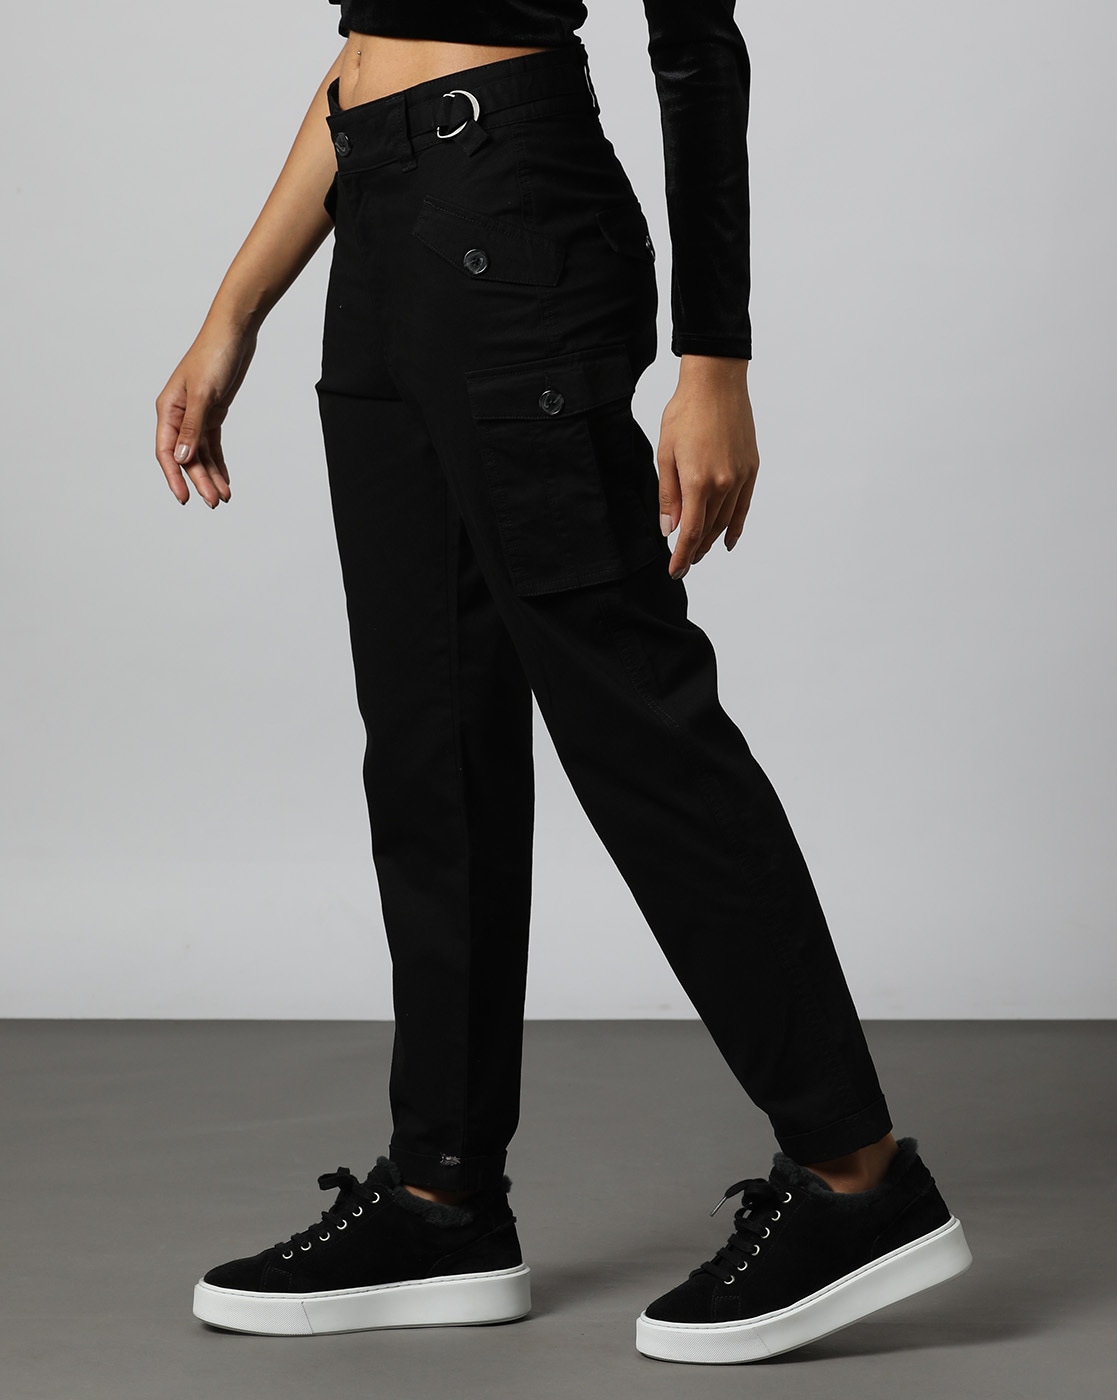 Buy Black Trousers & Pants for Women by Rare Online | Ajio.com